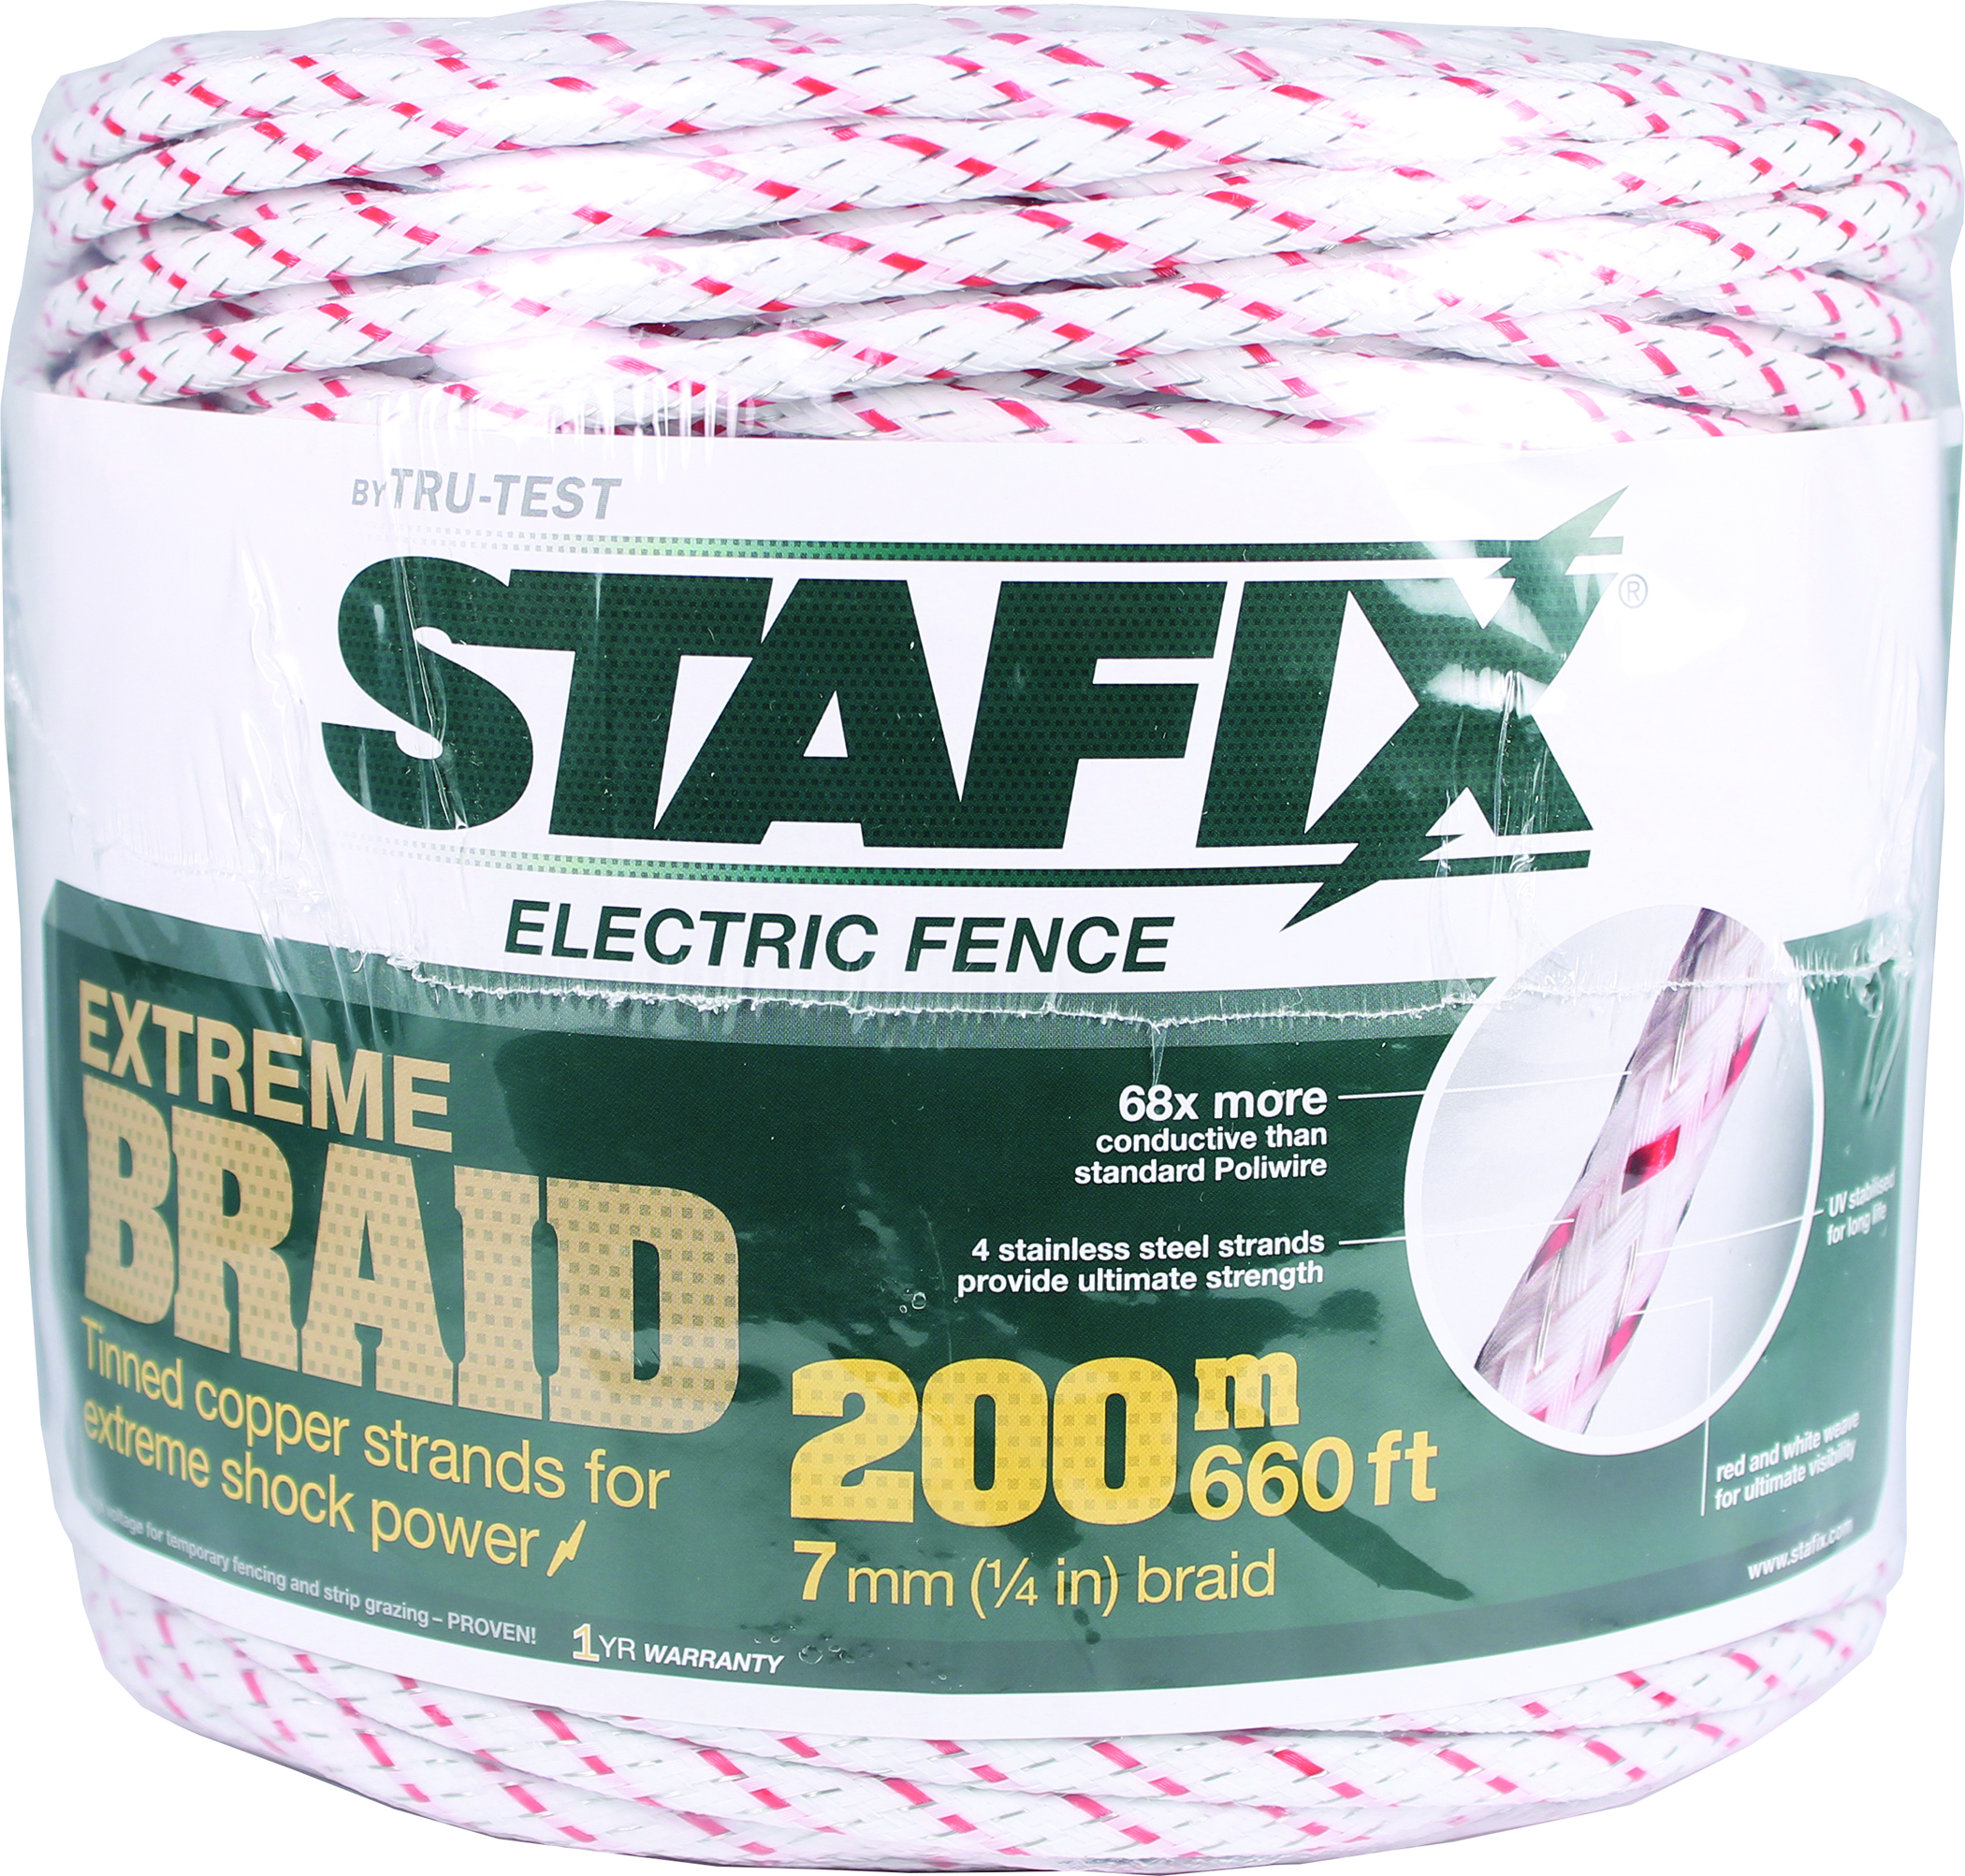 STAFFIX ELECTRIC FENCE EXTREME BRAID COPPER STRAND